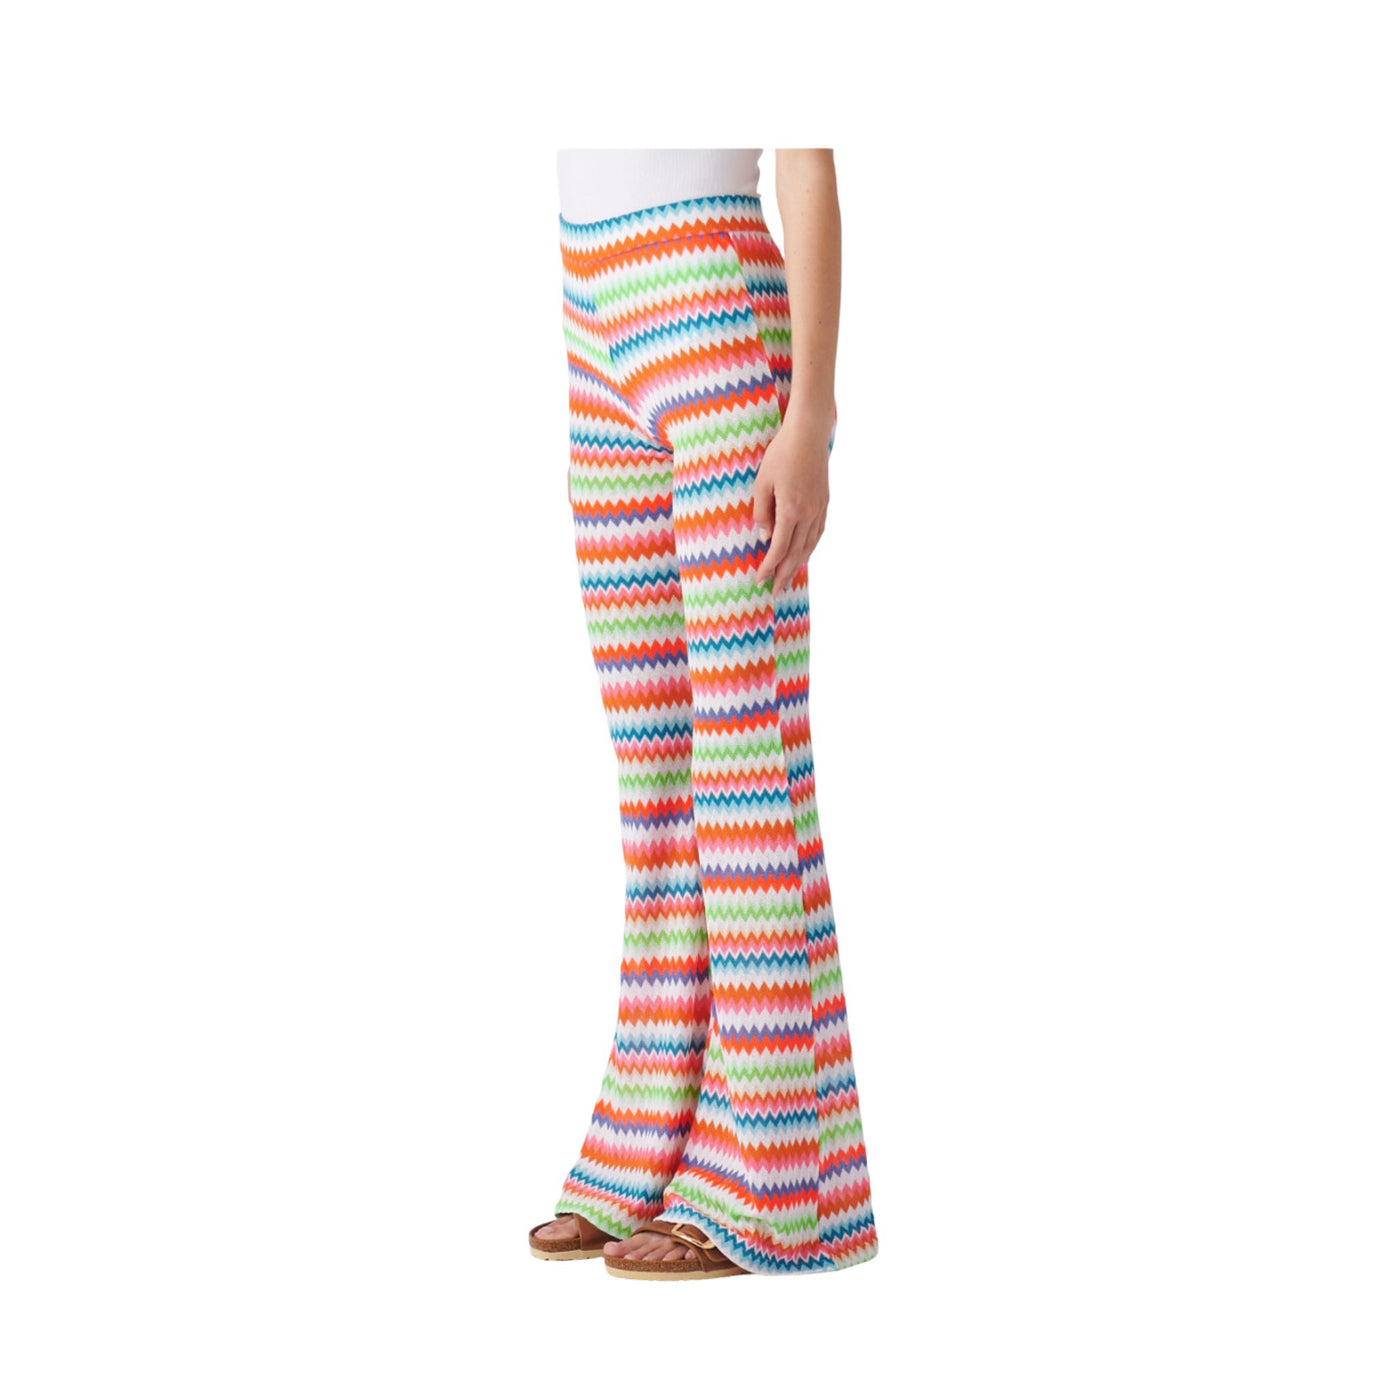 Women's trousers with multicolored pattern